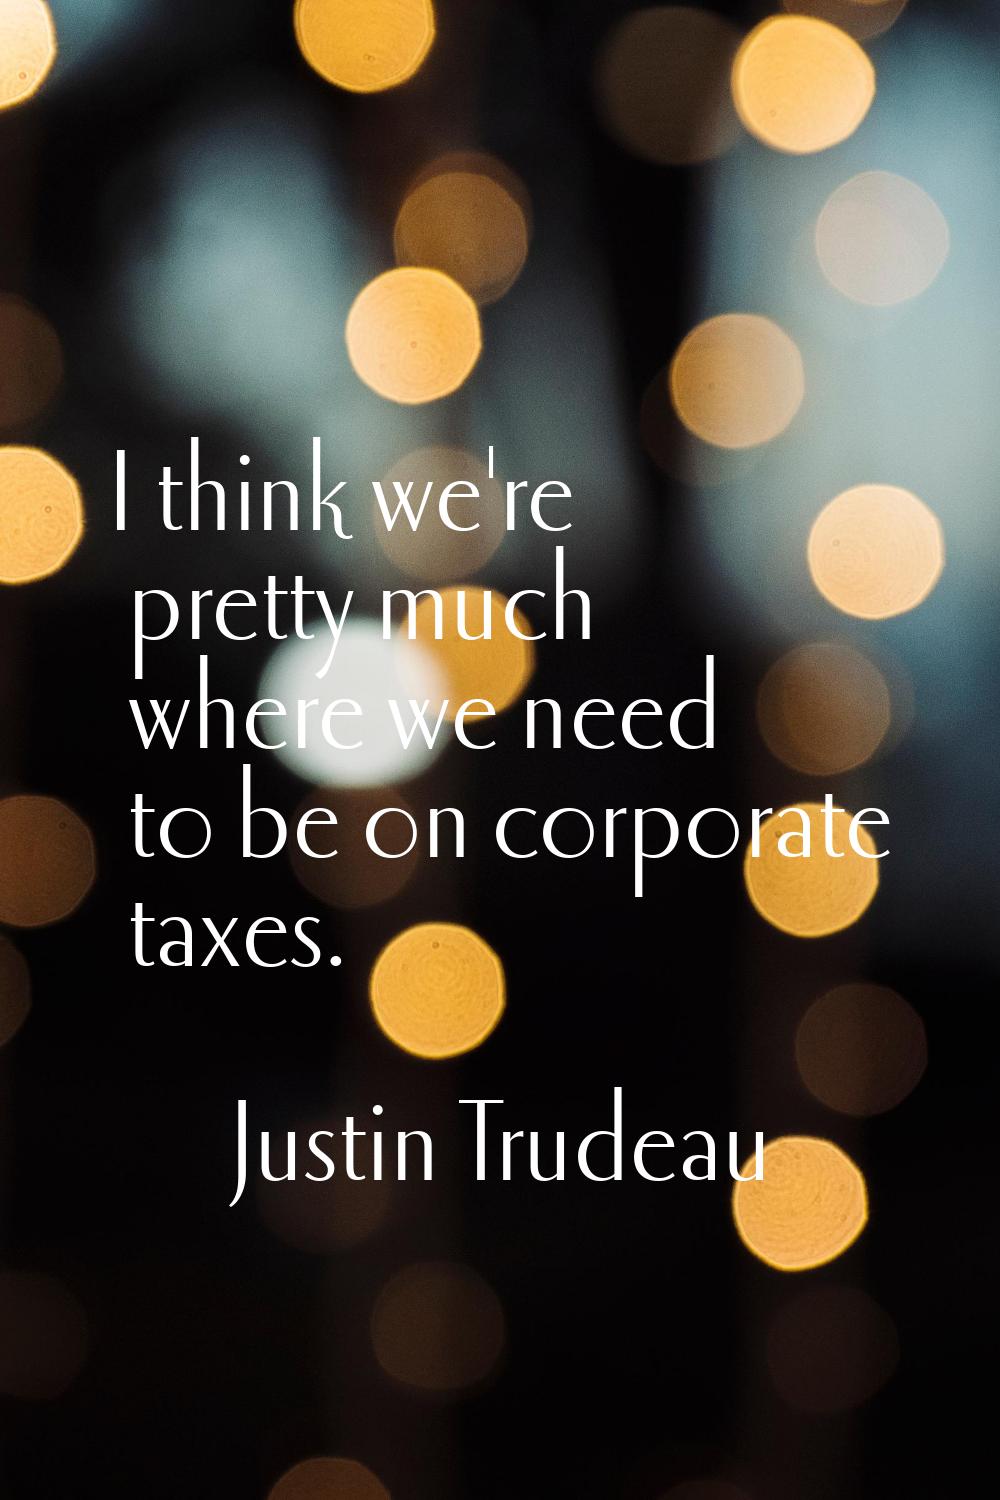 I think we're pretty much where we need to be on corporate taxes.